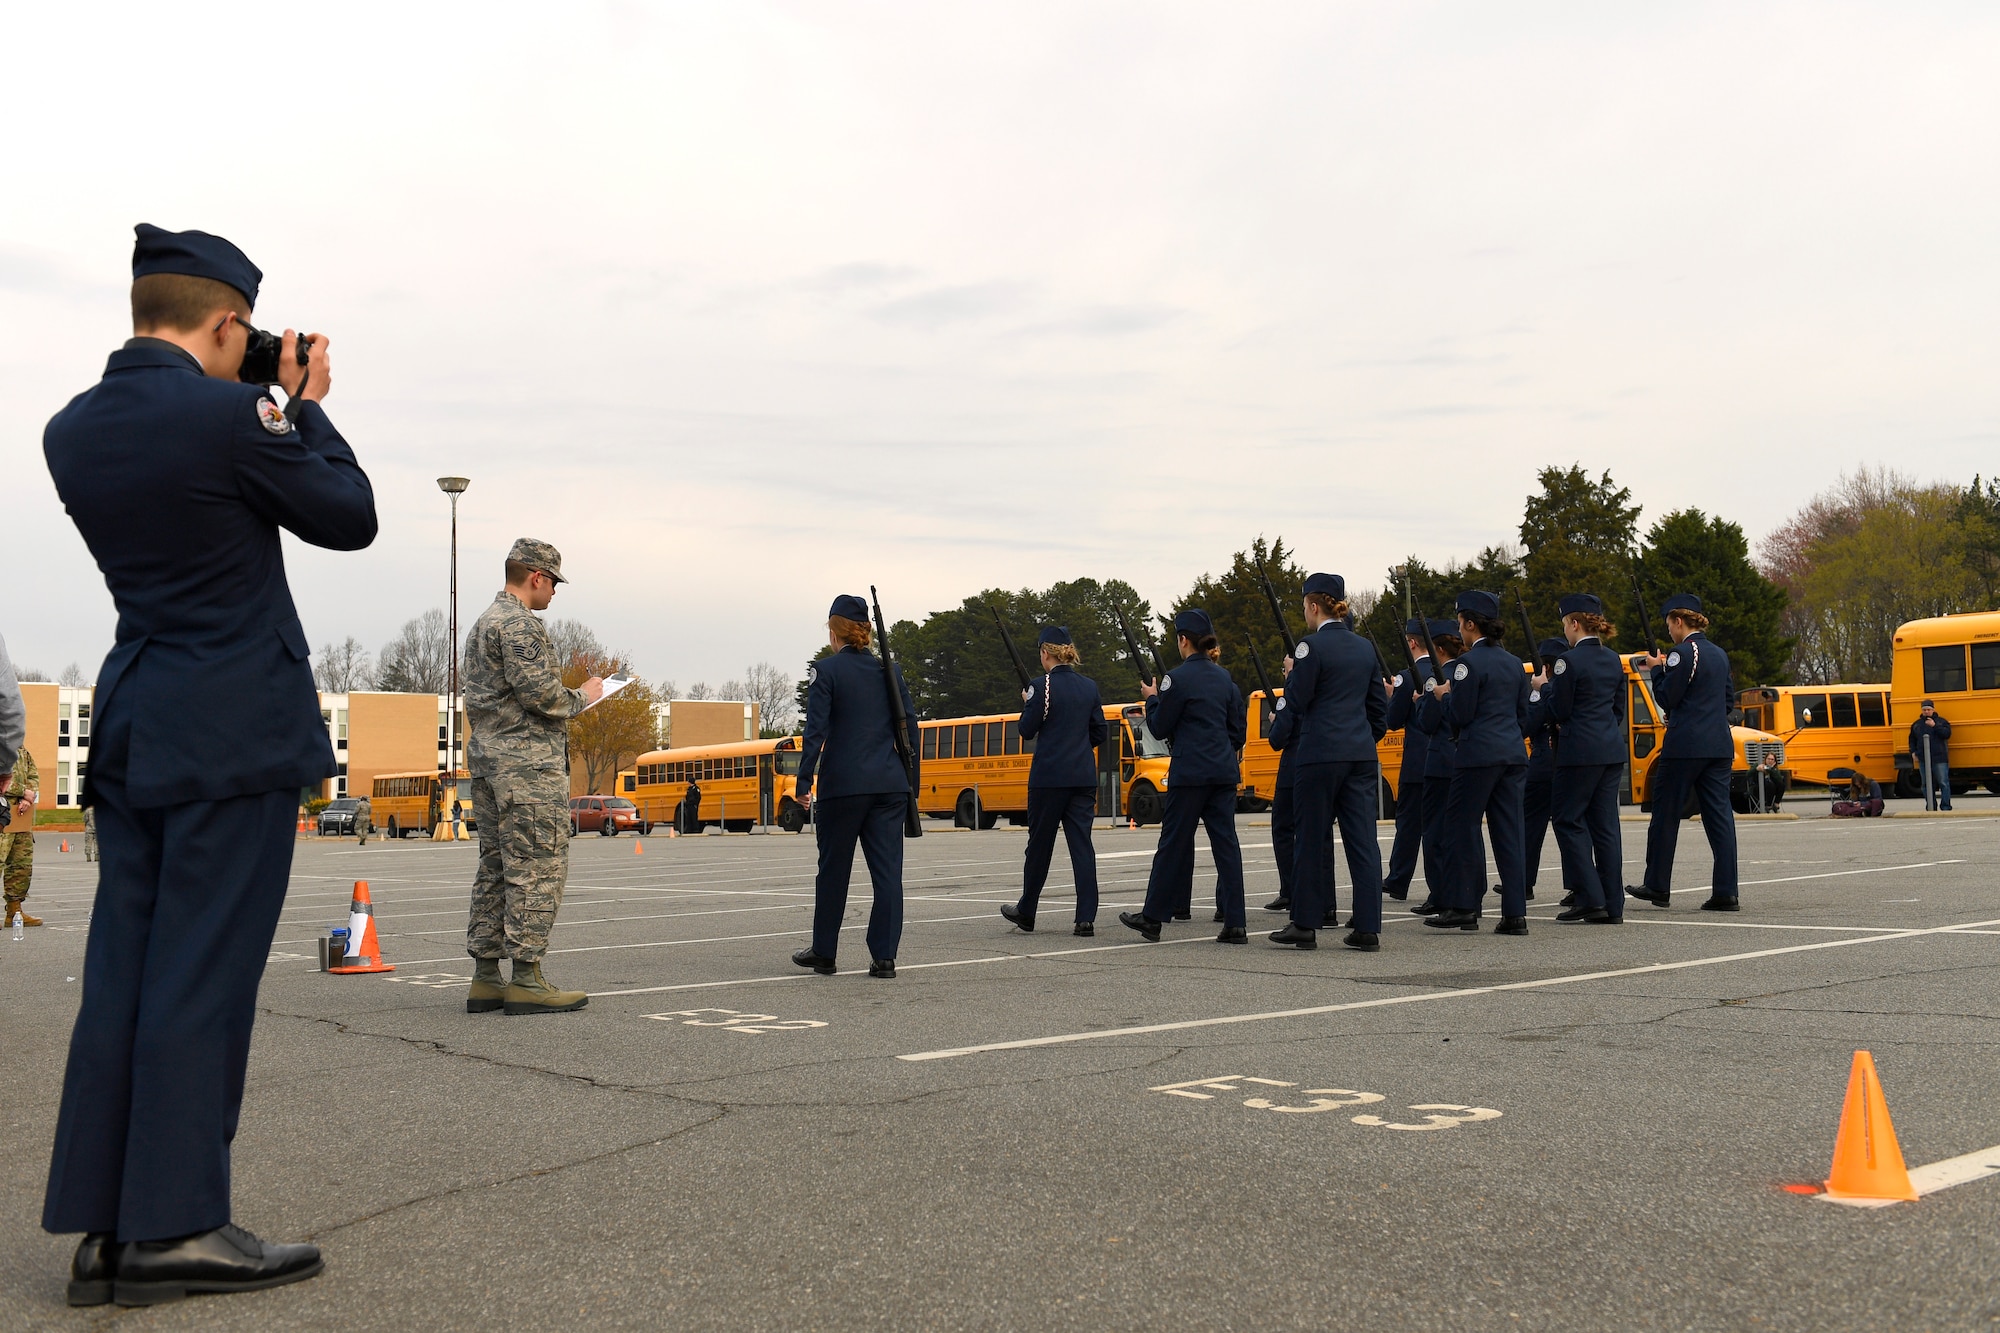 U.S Air Force Staff Sgt. Alexander Duncan, 145th Maintenance Squadron, grades Parkwood High School Air Force Junior Reserve Officers' Training Corps members on armed flight drill during the Patriot Classic Drill Competition held at Independence Hight School, Charlotte, N.C., March 10, 2018. Over 300 students from 14 high schools traveled from as far as 3 hours away to compete and were judged by volunteers from the North Carolina Air and Army National Guard.